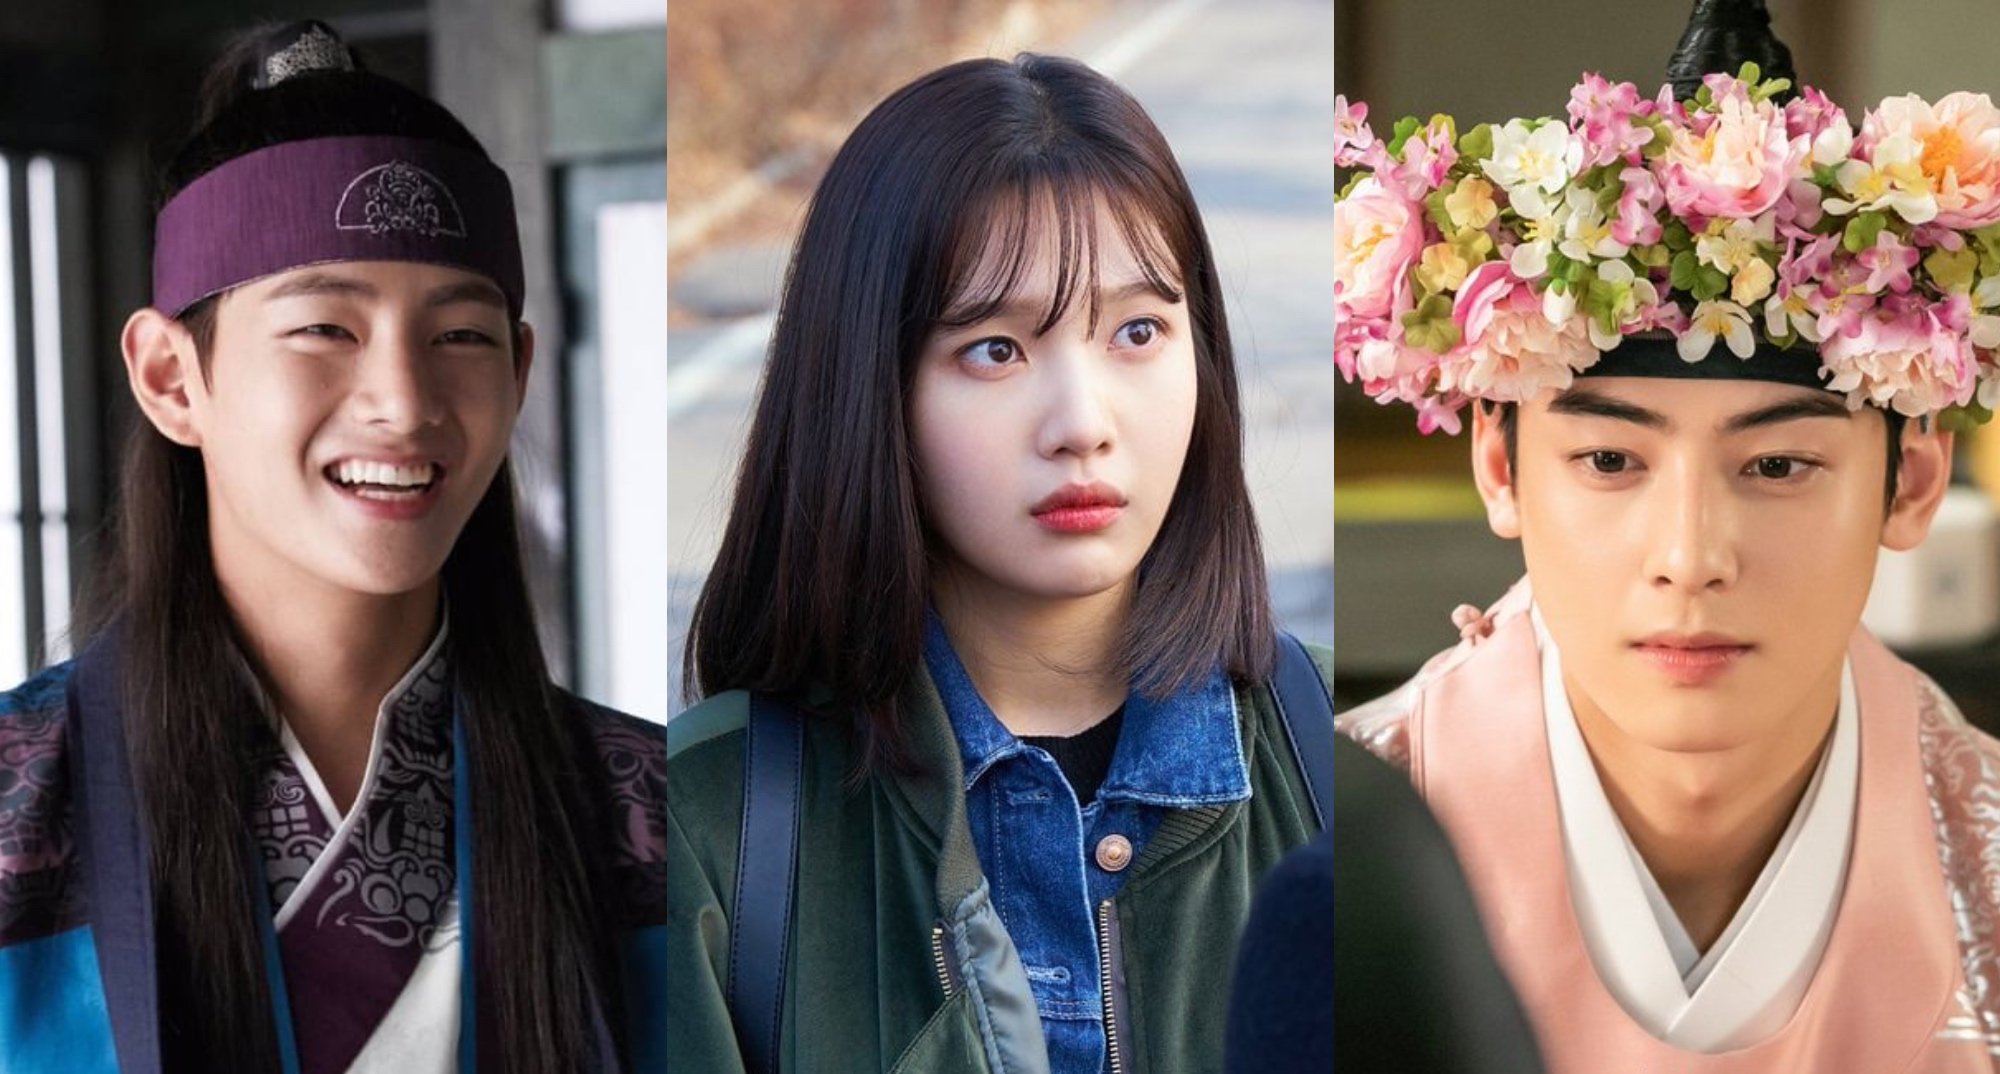 K-pop idols V, Joy and Cha Eun-woo in their roles in popular K-dramas like 'Tempted'.